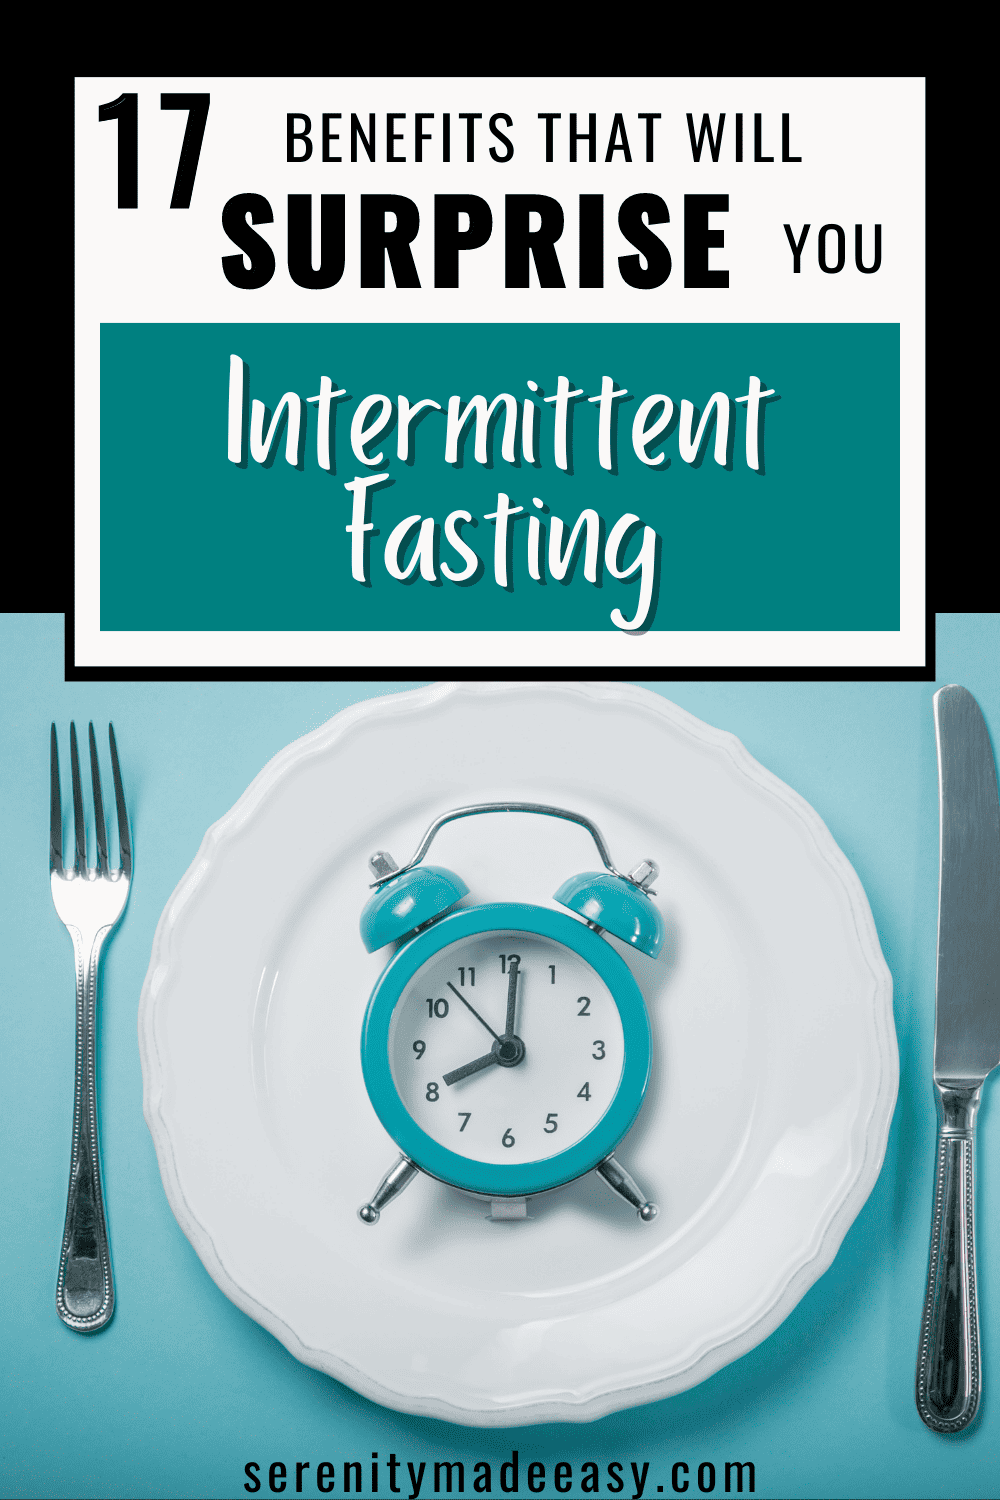 A white plate with only a teal clock on it and silverware next to it illustrating starting Intermittent fasting